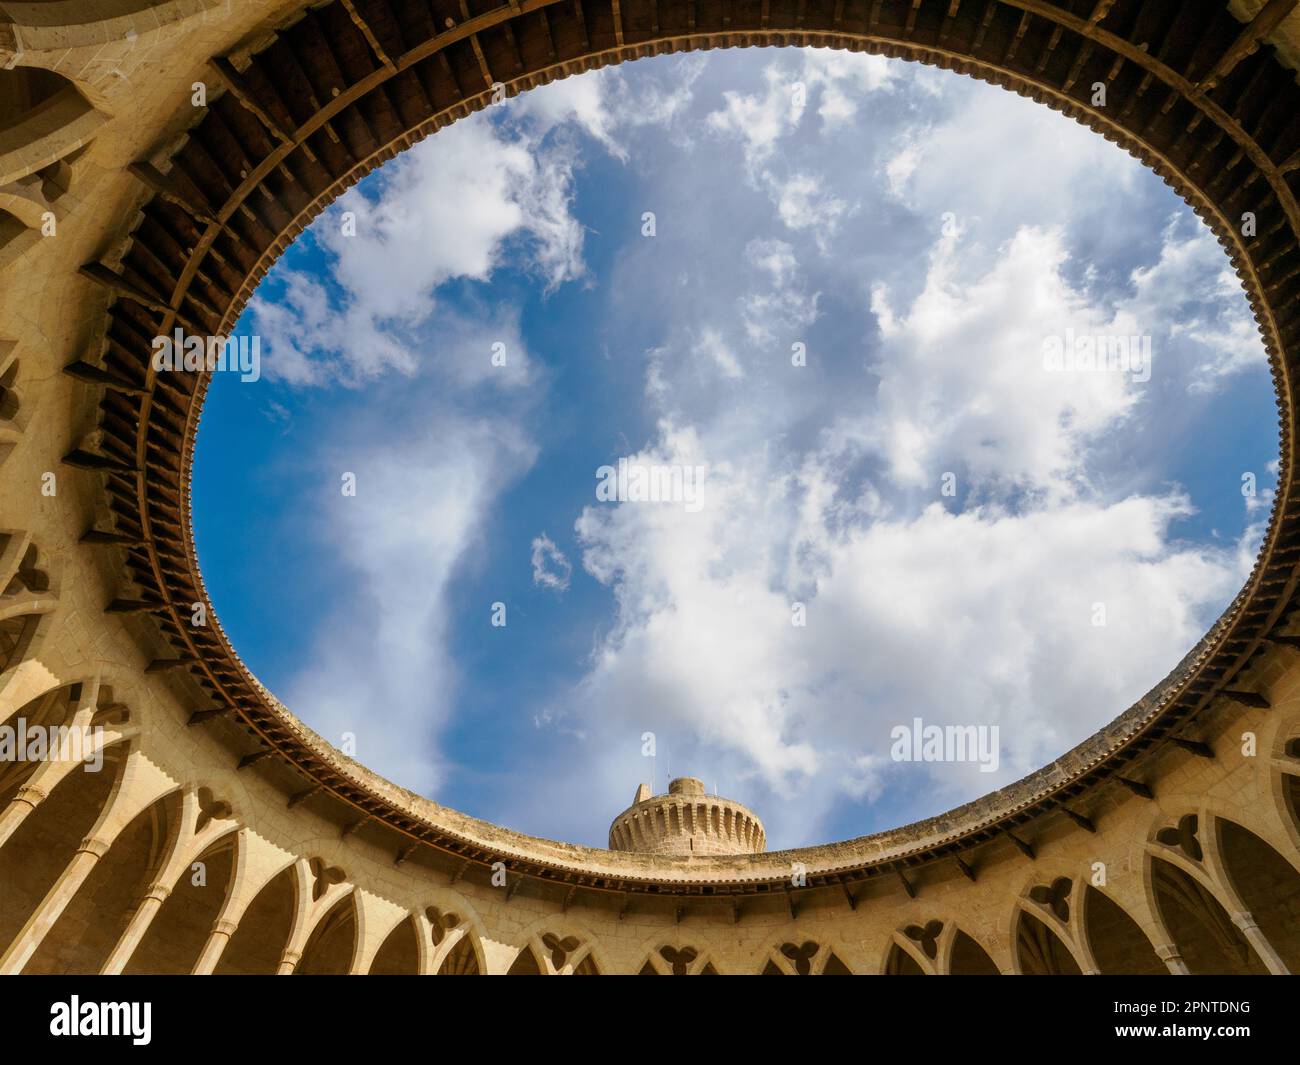 Gothic arched central courtyard of Bellver Castle the Castillo de Bellver high on a hill overlooking Palma de Majorca in the Balearic Islands of Spain Stock Photo